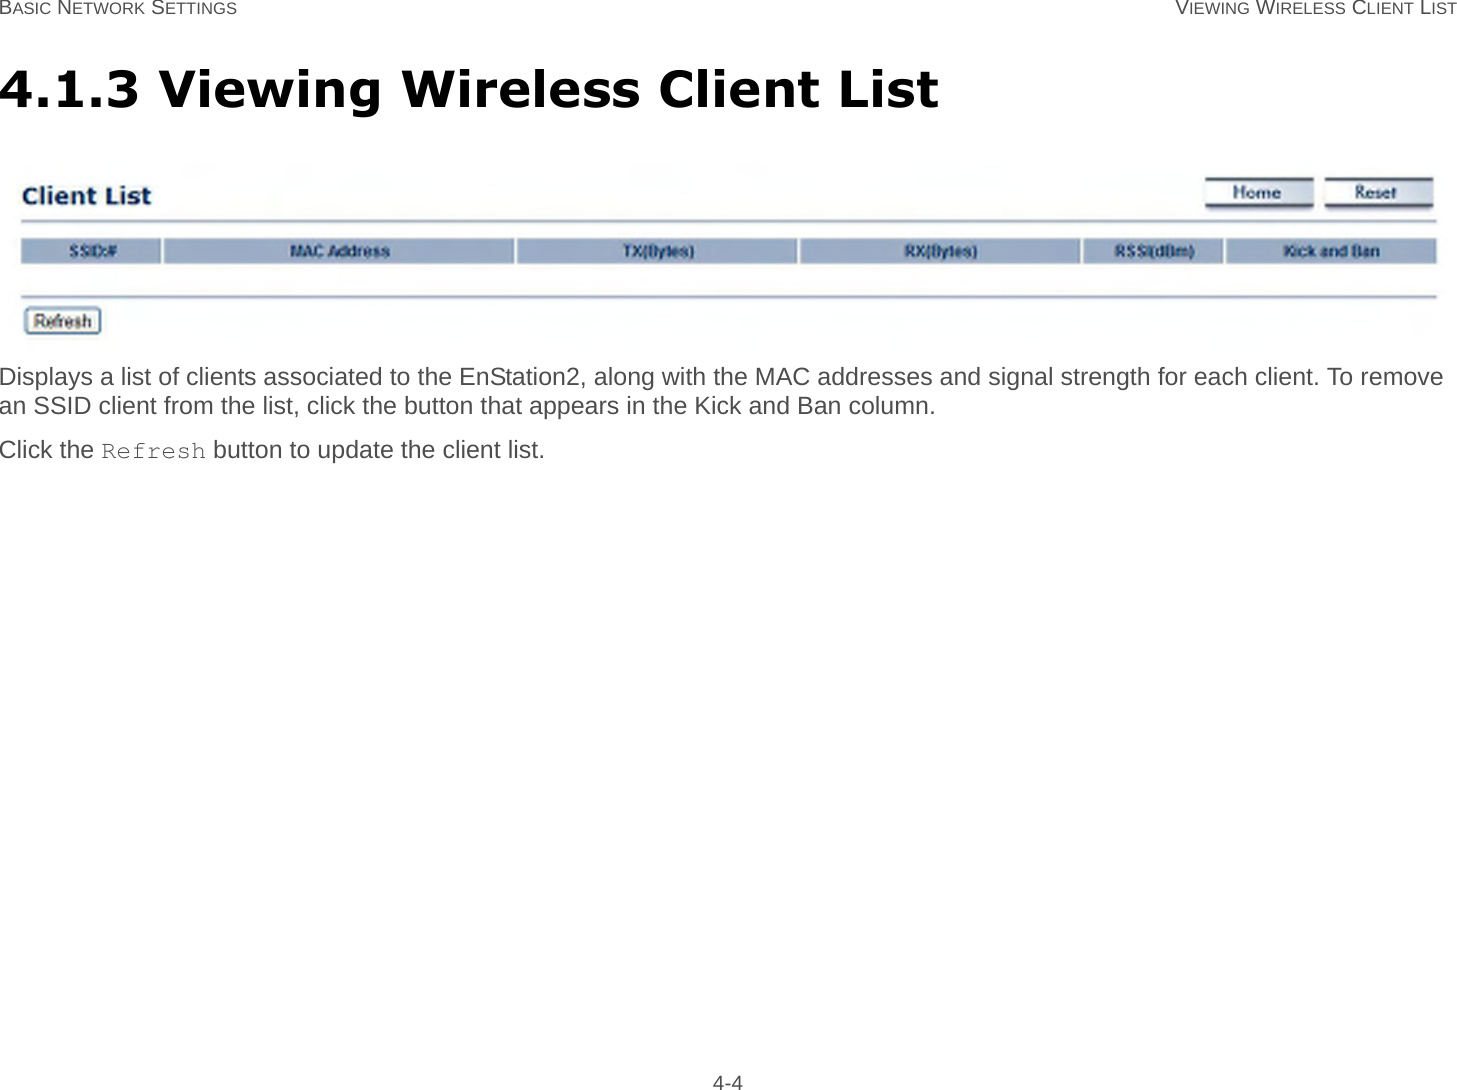 BASIC NETWORK SETTINGS VIEWING WIRELESS CLIENT LIST 4-44.1.3 Viewing Wireless Client ListDisplays a list of clients associated to the EnStation2, along with the MAC addresses and signal strength for each client. To remove an SSID client from the list, click the button that appears in the Kick and Ban column.Click the Refresh button to update the client list.